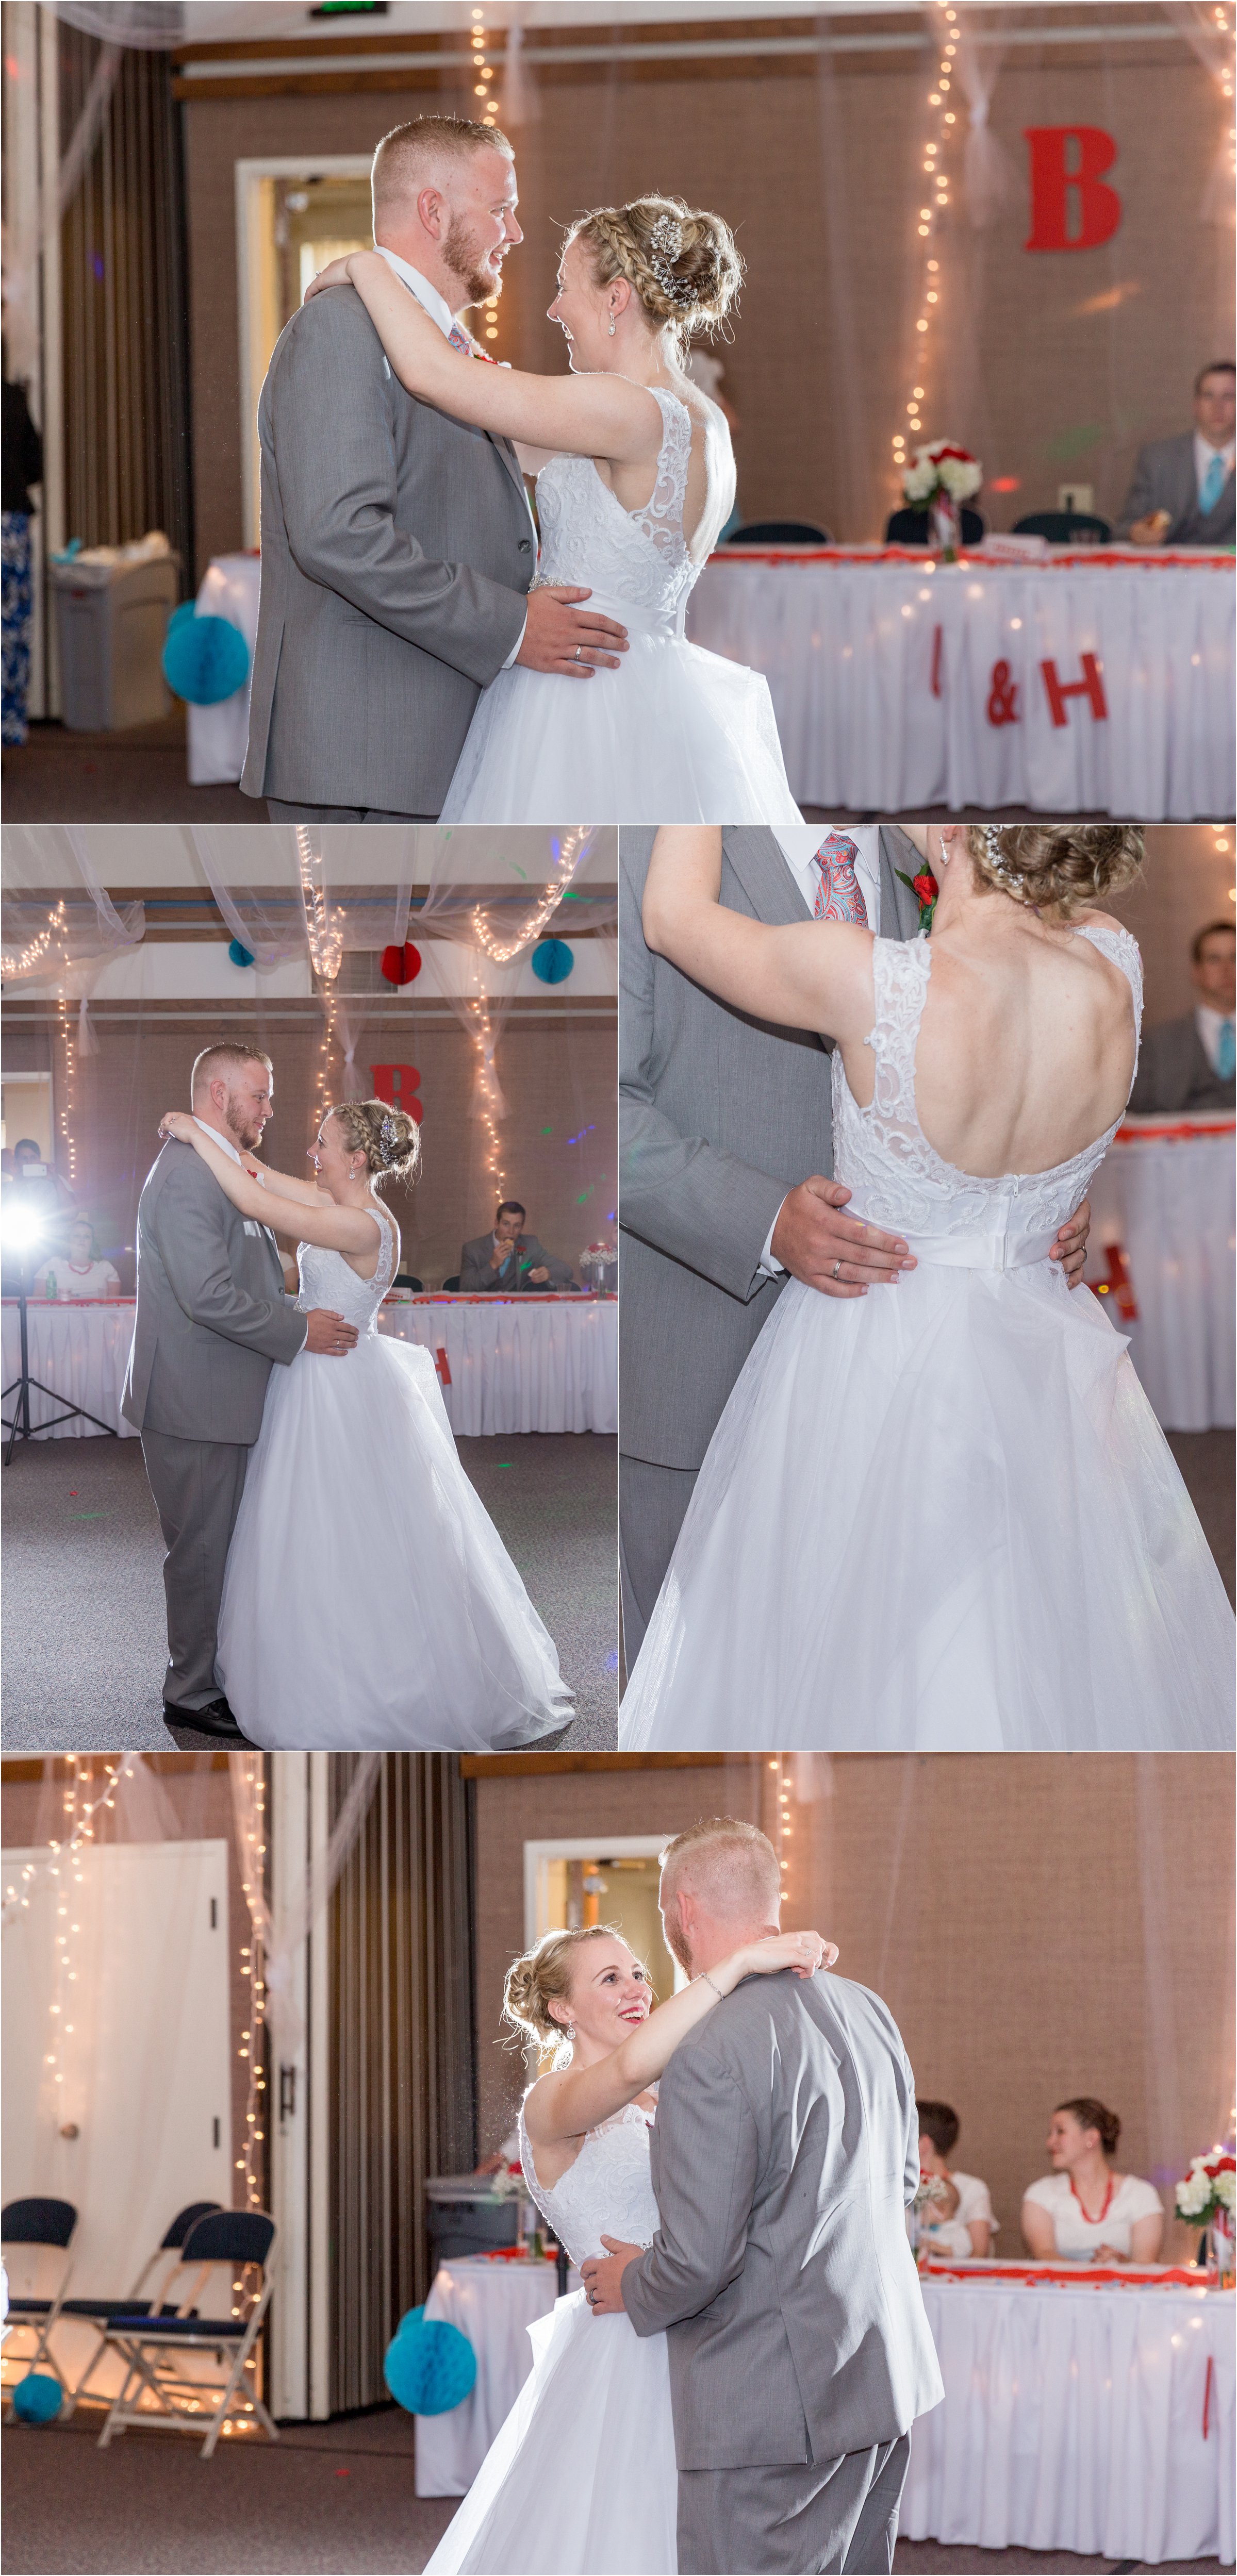 bride and groom dance together at their wedding reception for the first dance as husband and wife